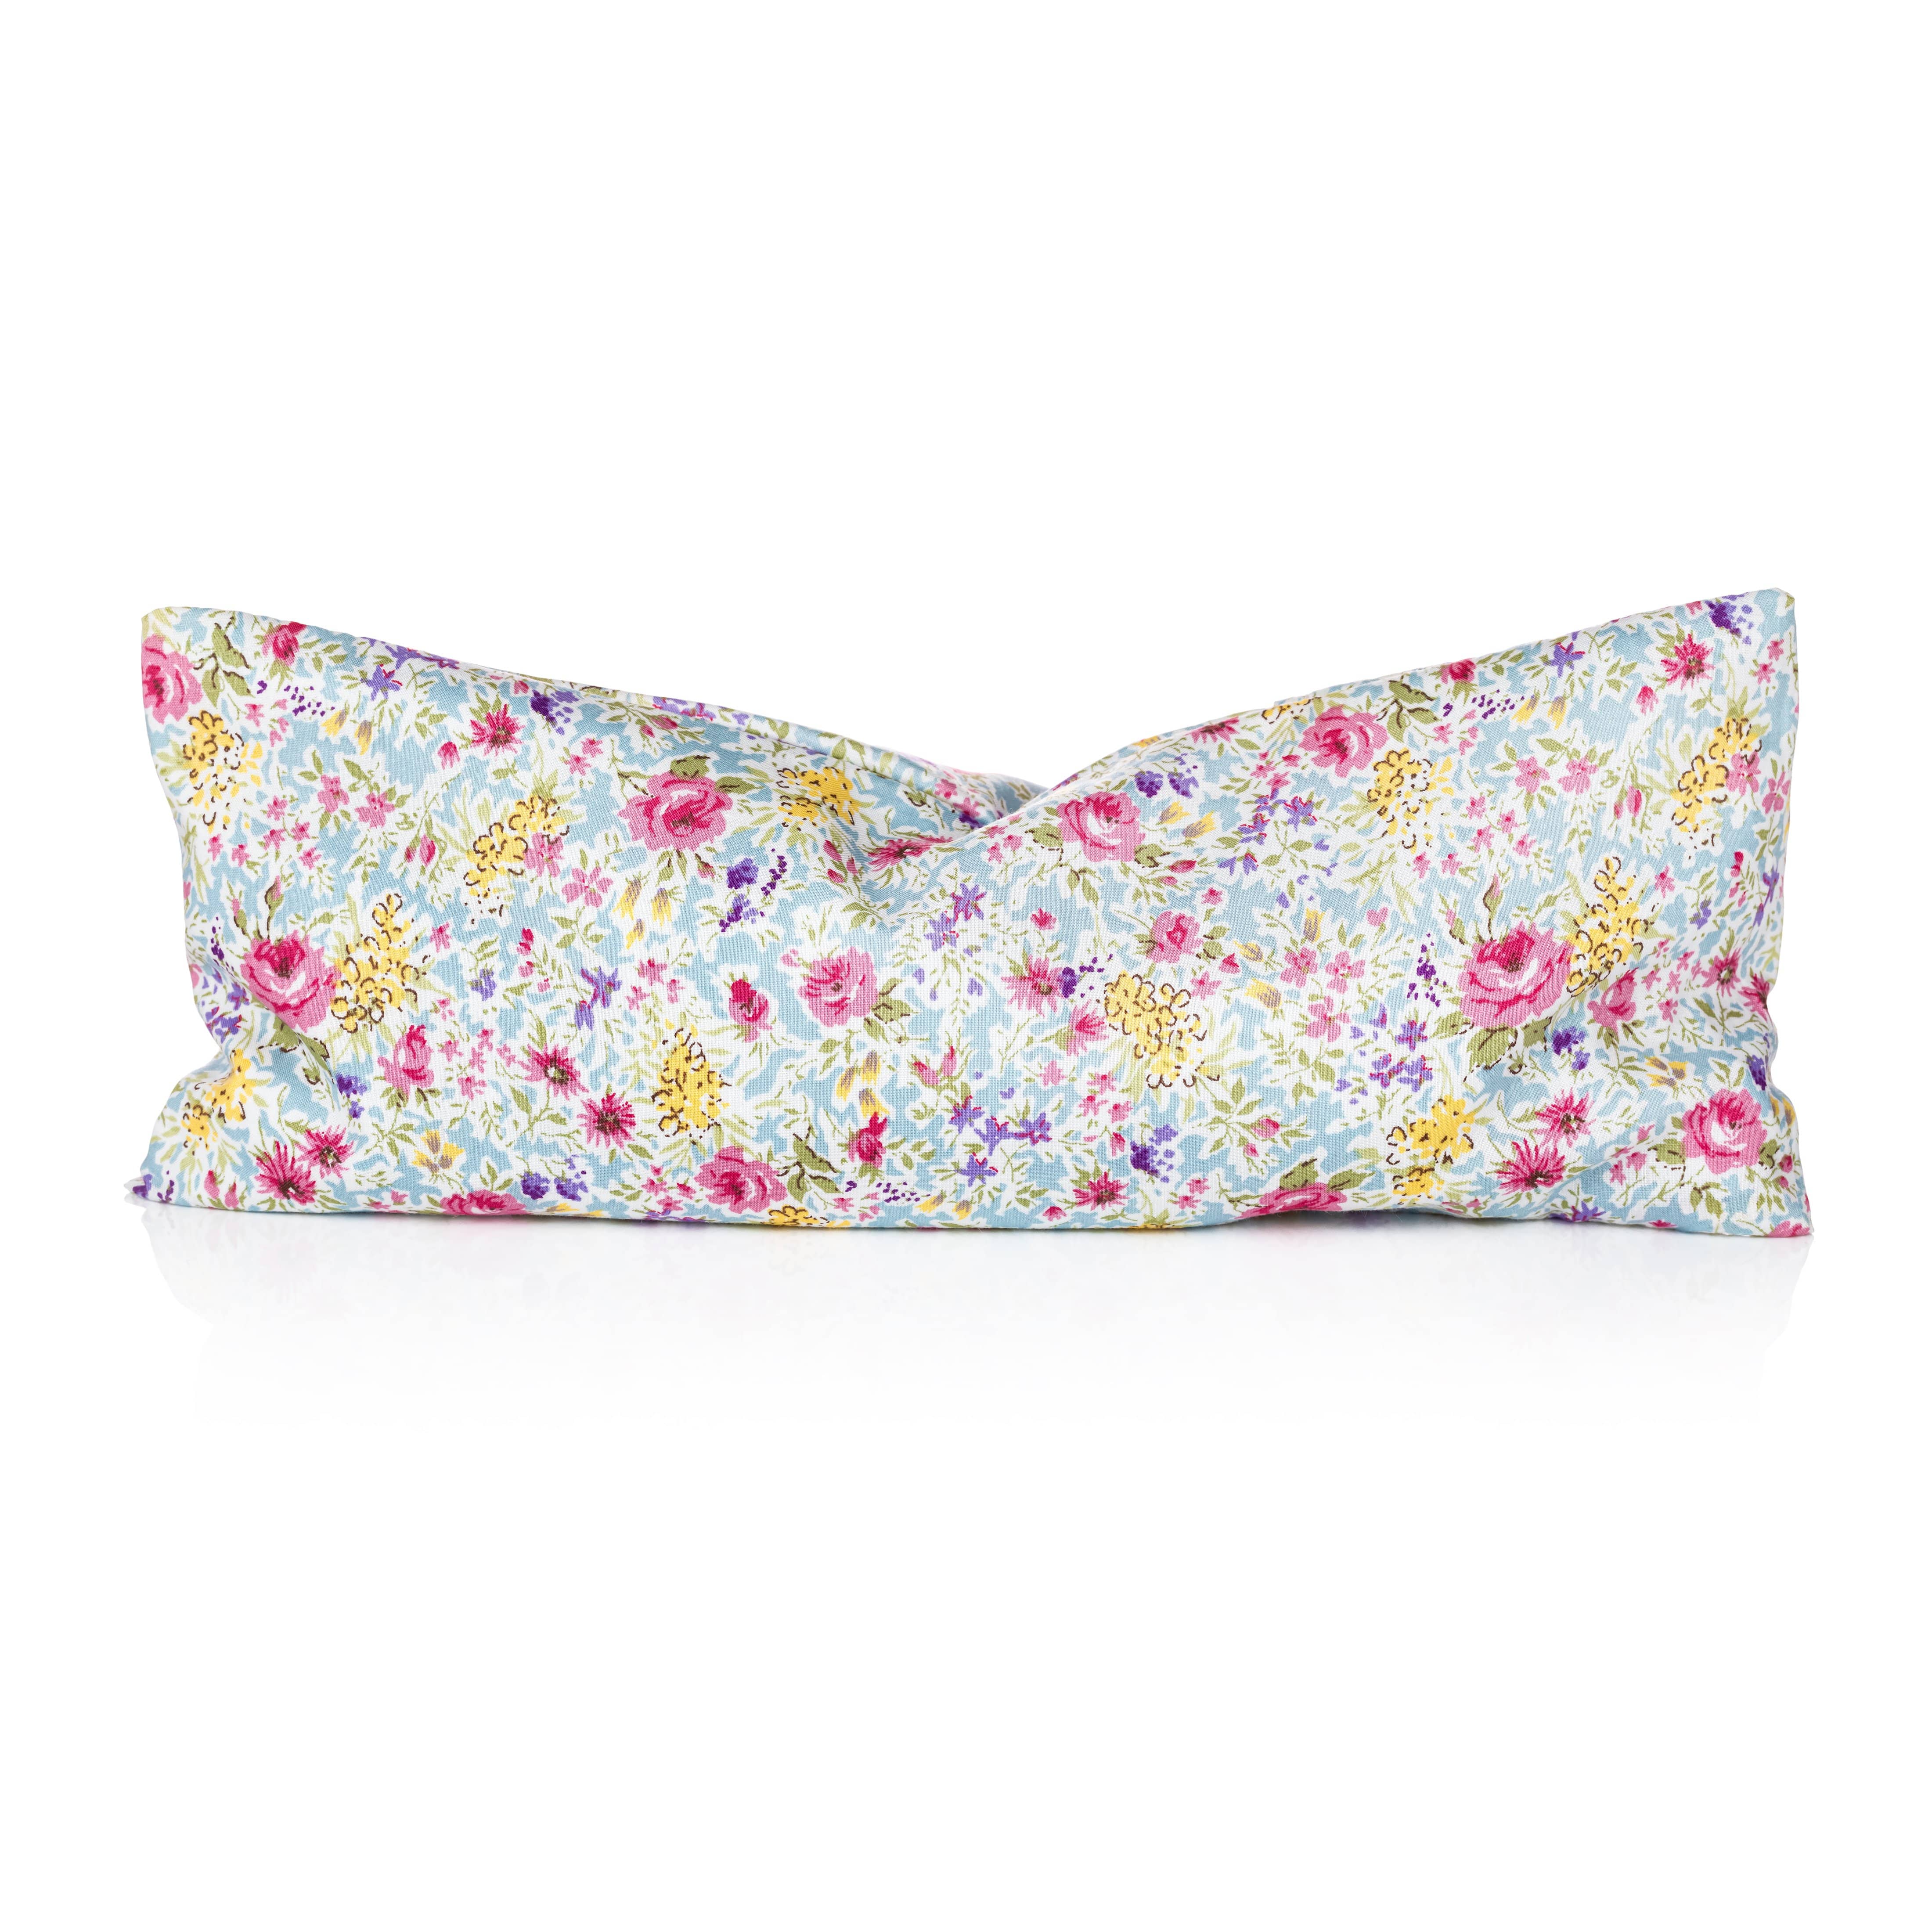 Relaxation Eye Pillow Pale Blue Floral Pattern - Clarity Blend